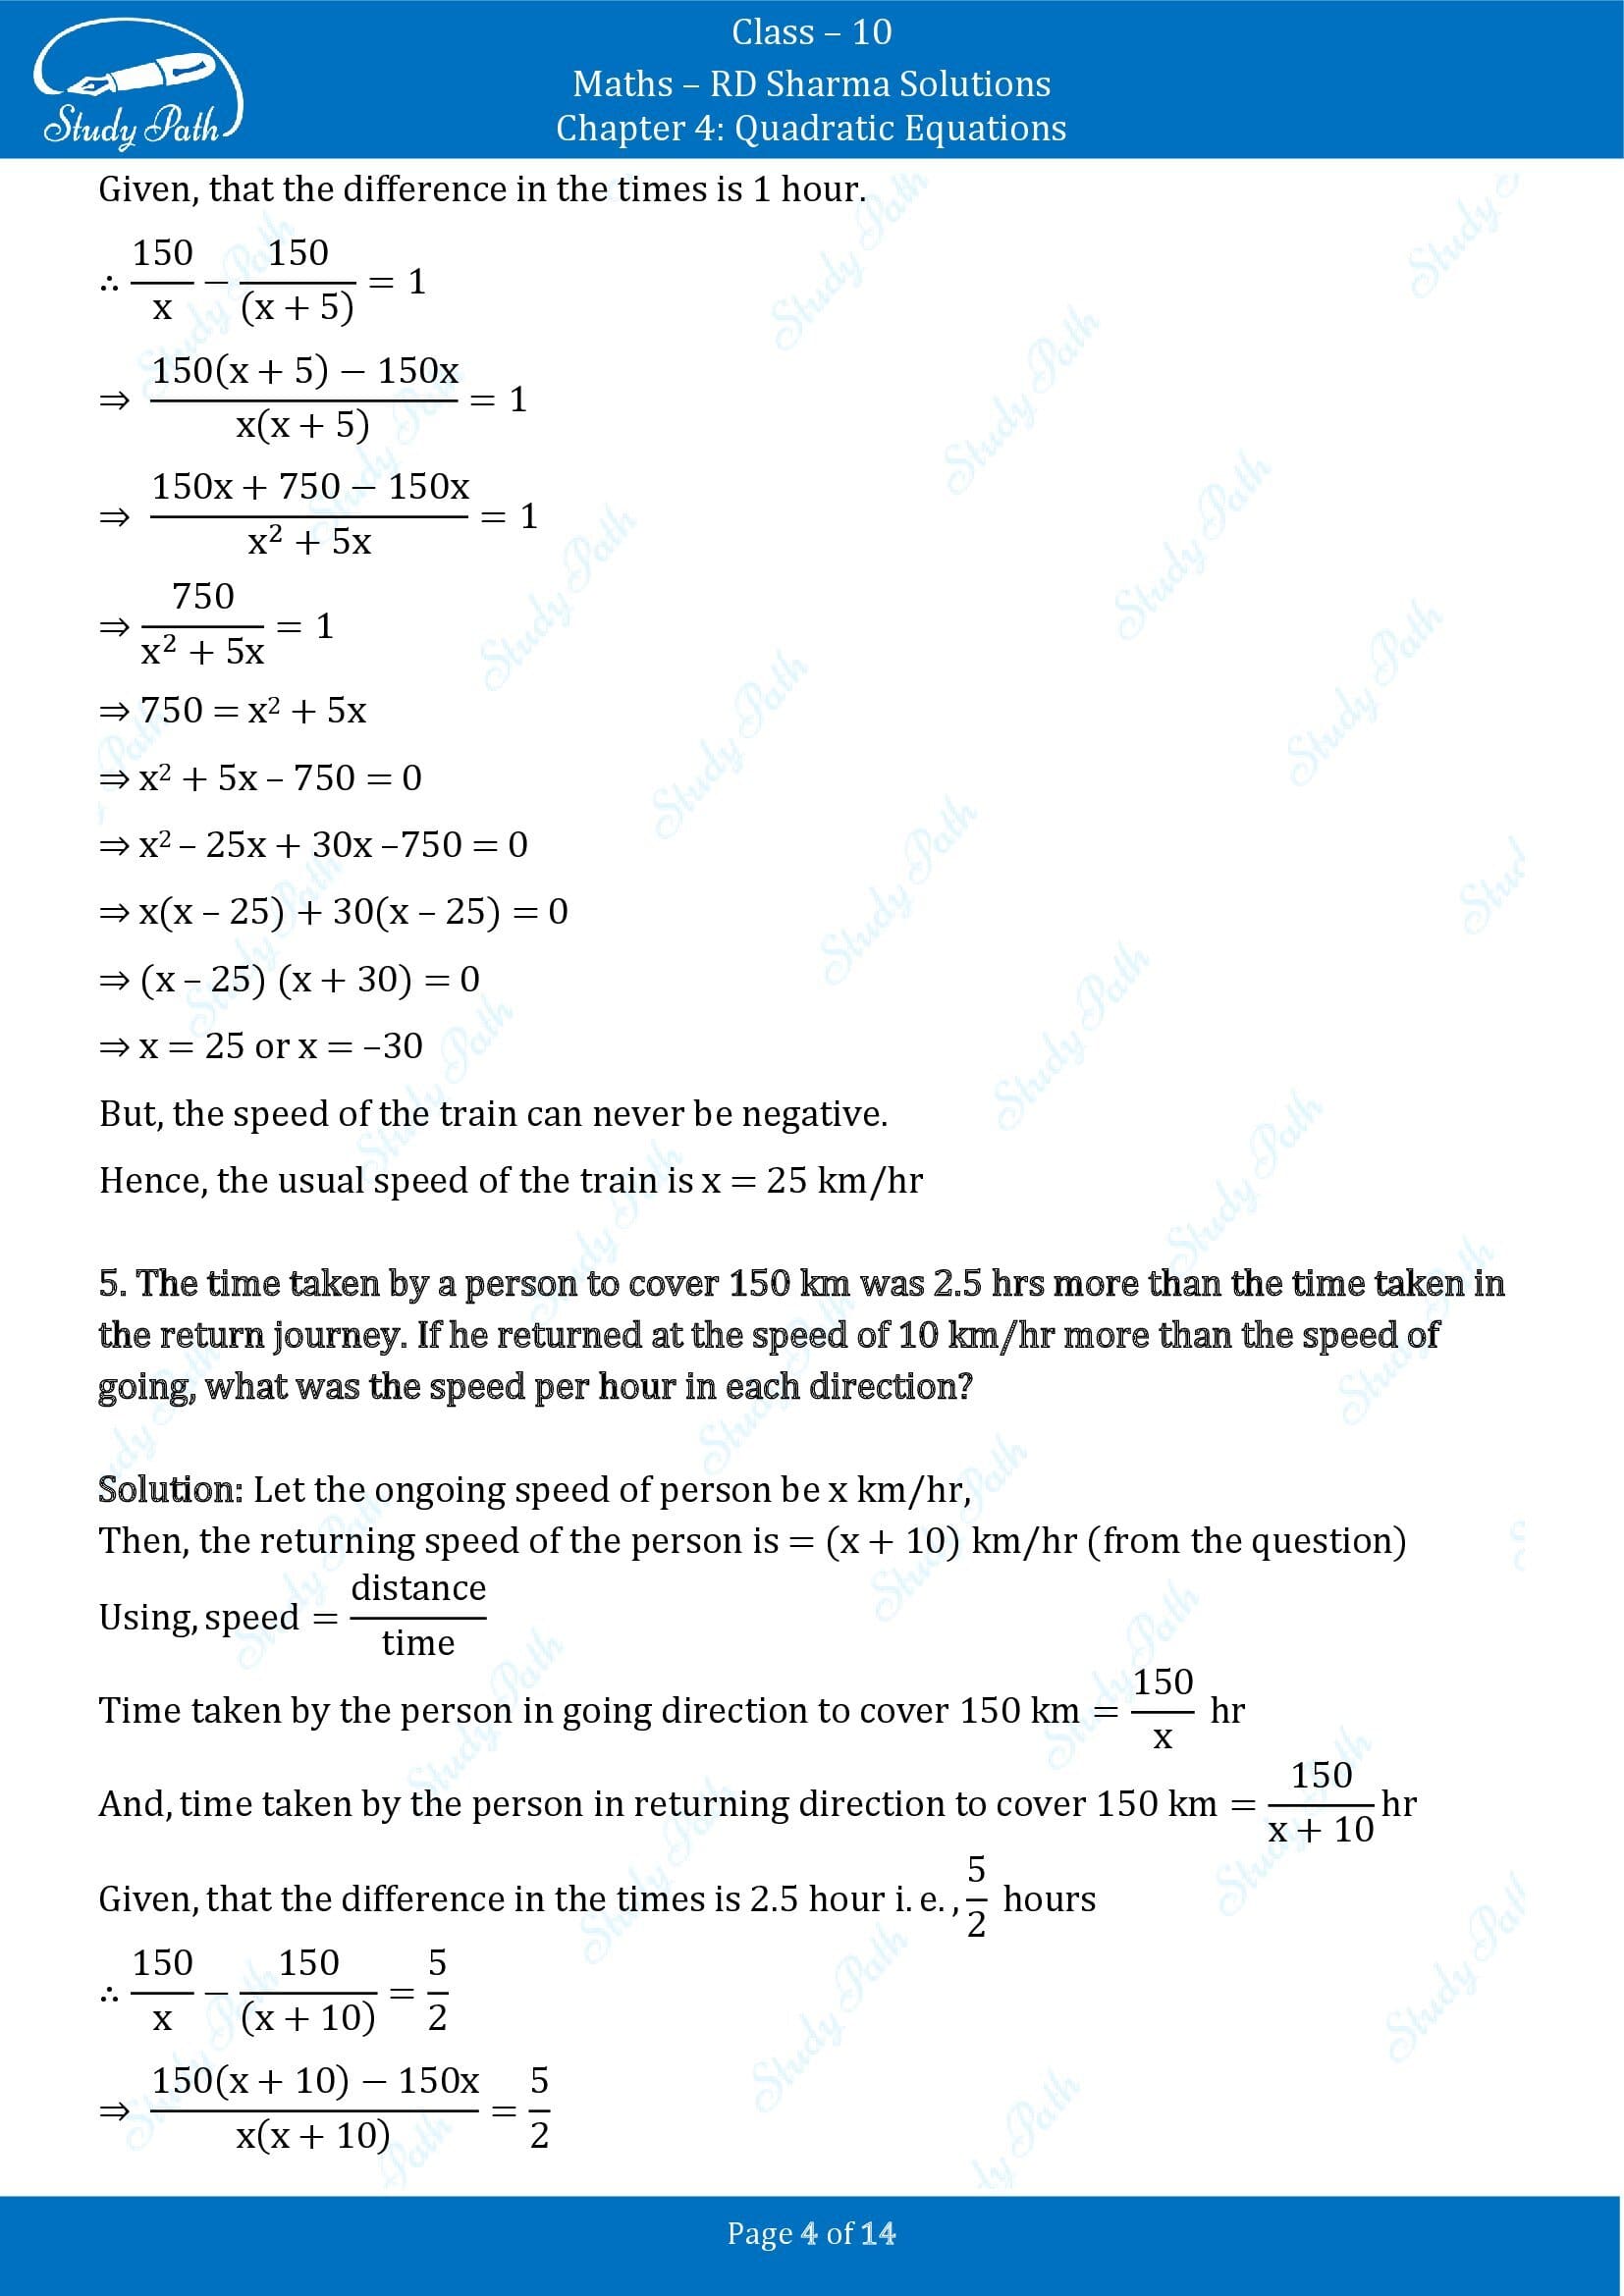 RD Sharma Solutions Class 10 Chapter 4 Quadratic Equations Exercise 4.8 00004